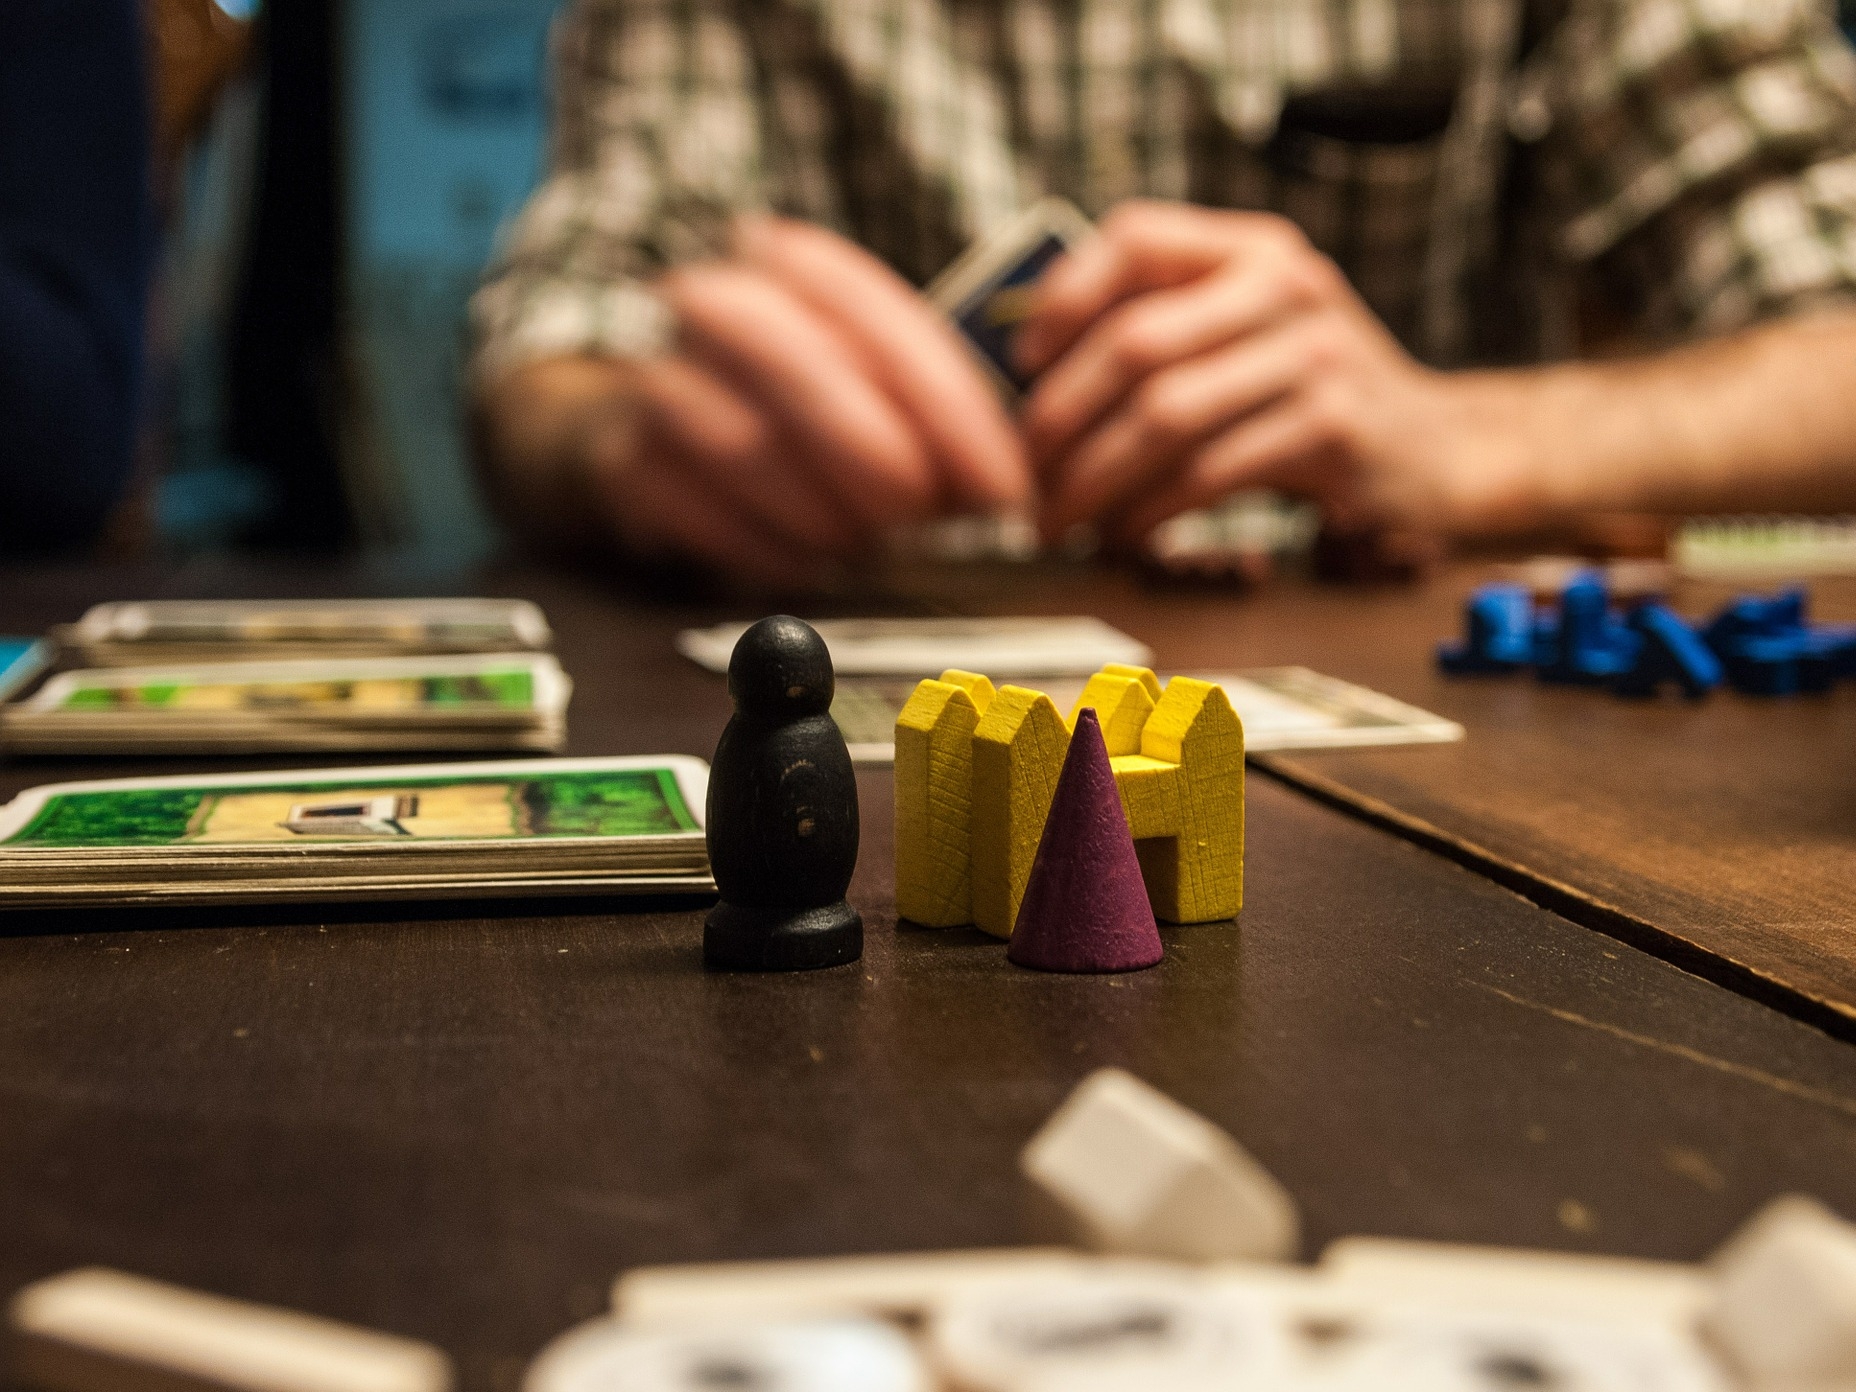 How to destroy your friends and family in 4 popular board games